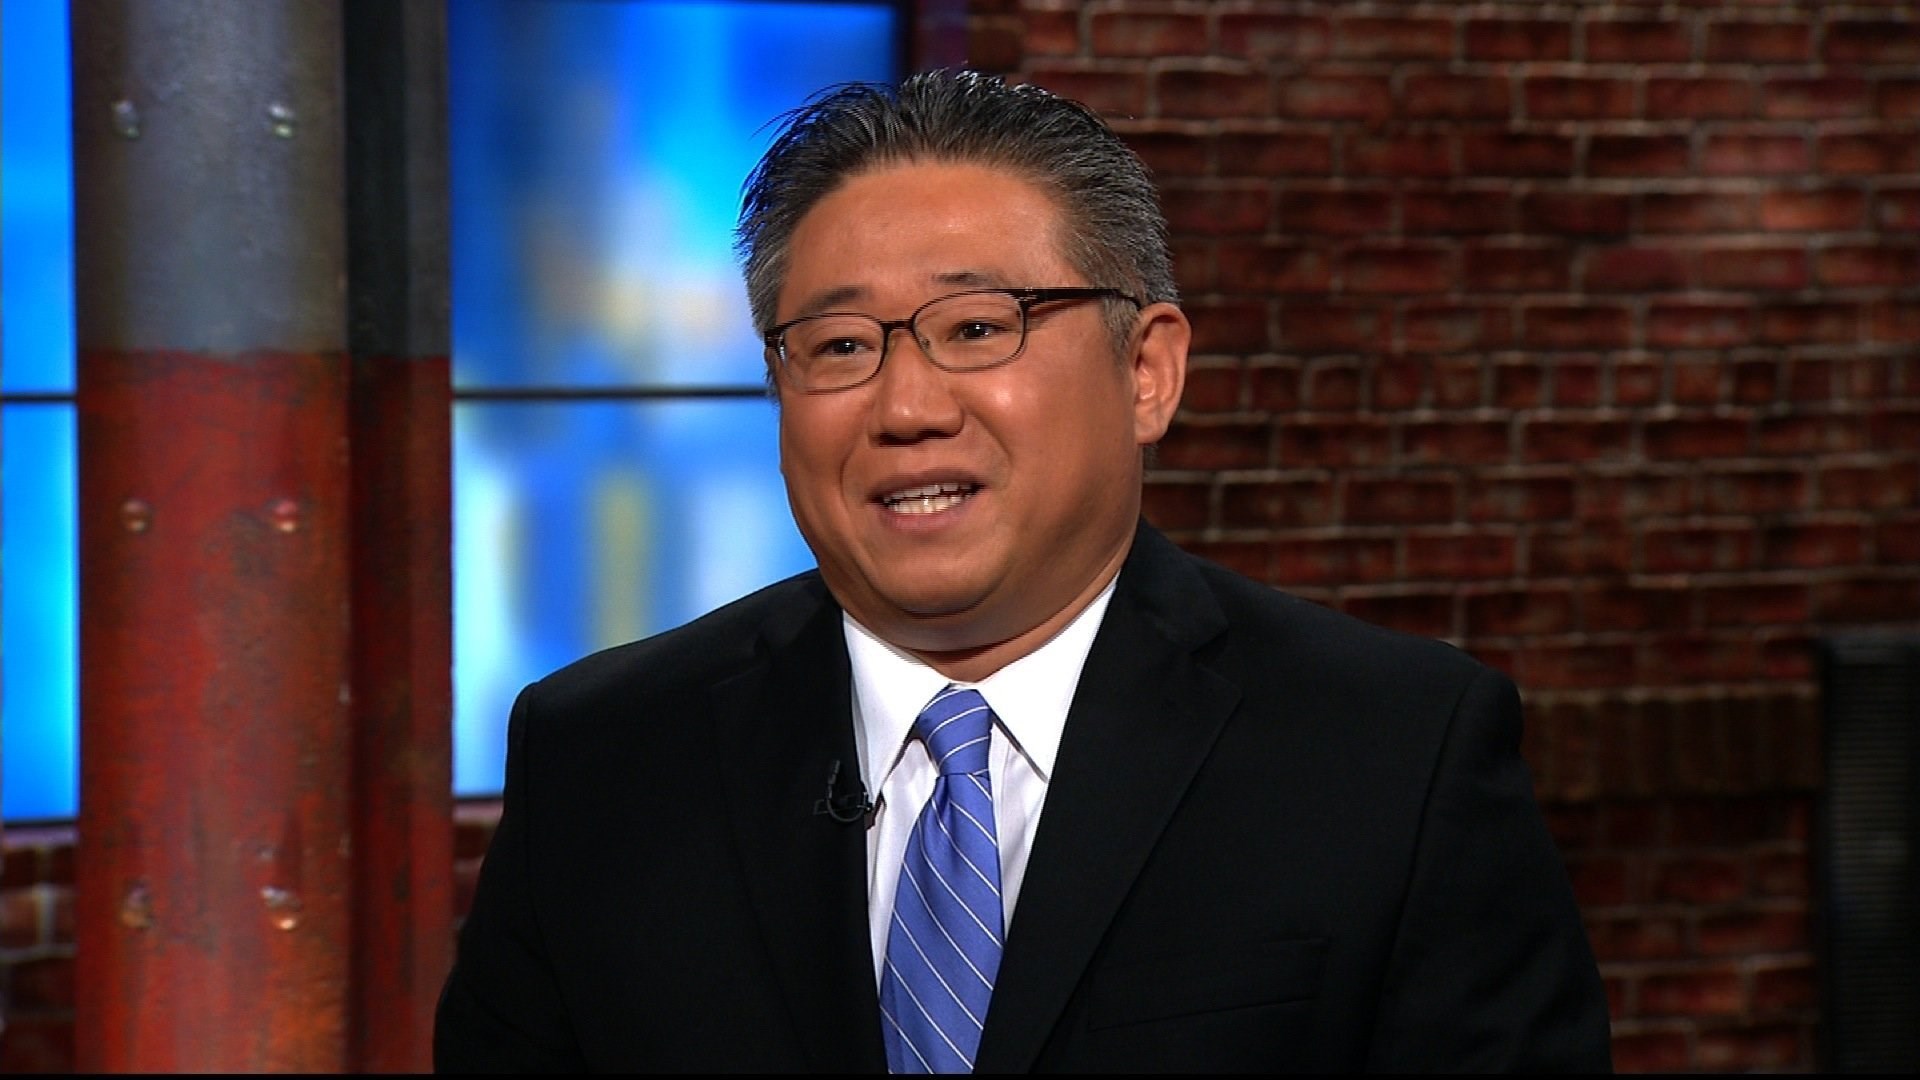 Kenneth Bae was born in South Korea and immigrated at age 16 to the United States with his parents. Bae was arrested in North Korea in 2012 and convicted by North Korea of "hostile acts'' in 2013, sentenced to 15 years' hard labor. He was released in November 2014